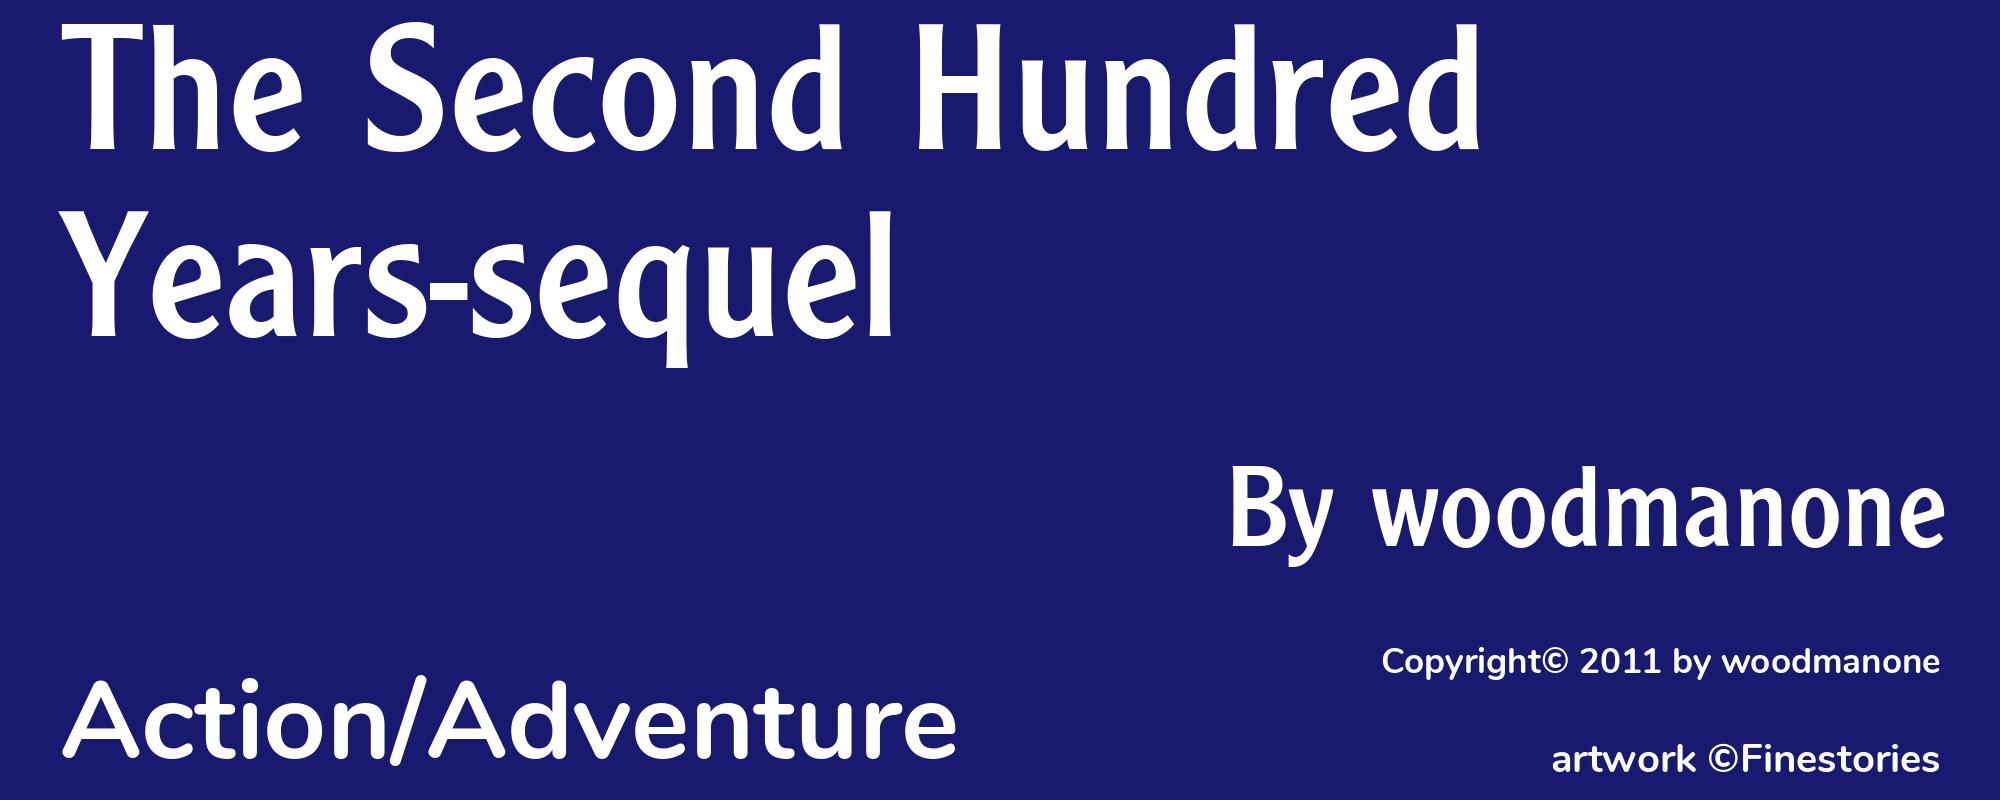 The Second Hundred Years-sequel - Cover